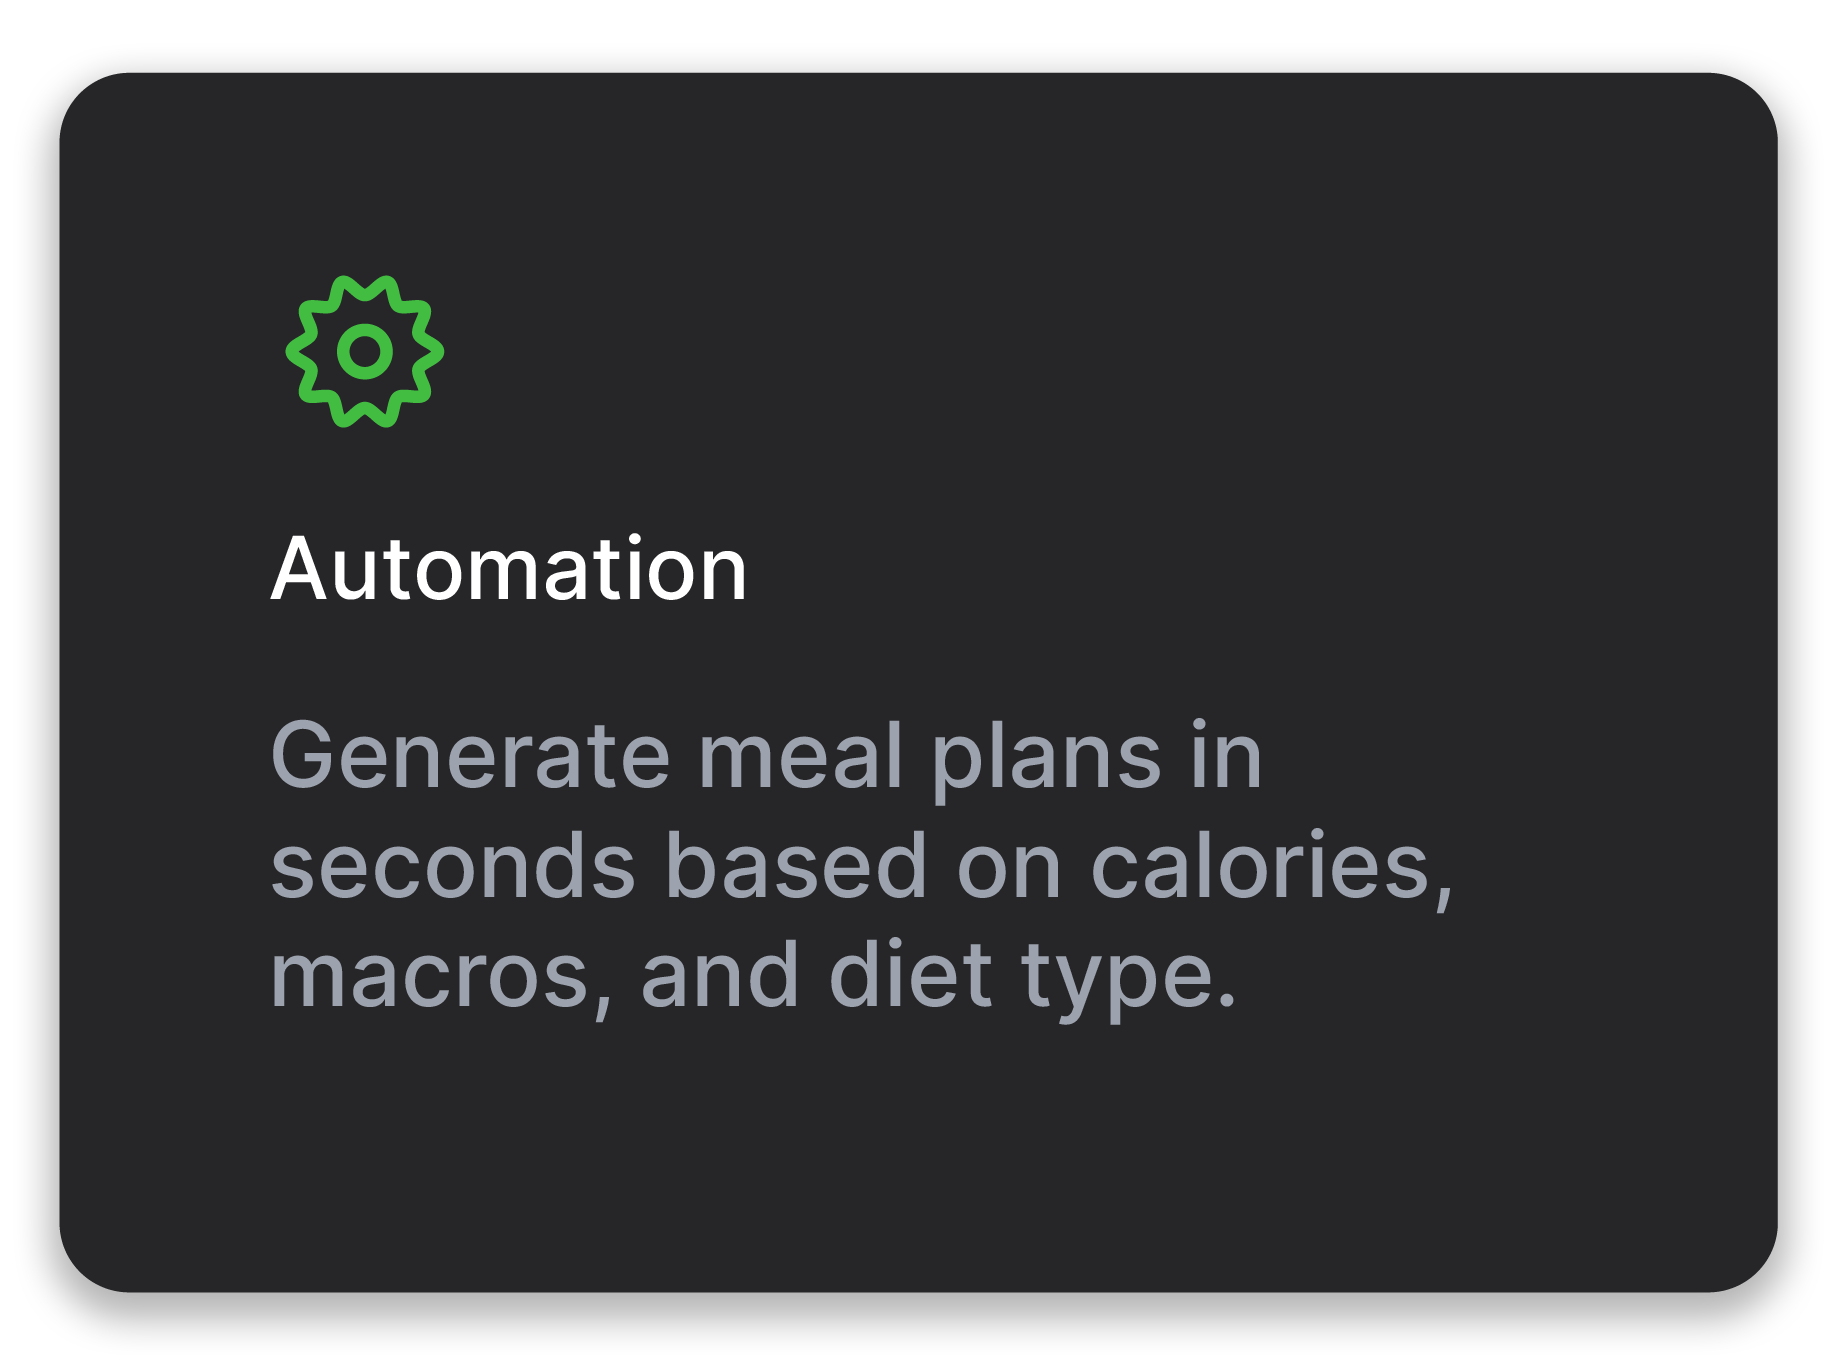 Automation - Generate meal plans in seconds based on calories, macros, and diet type.